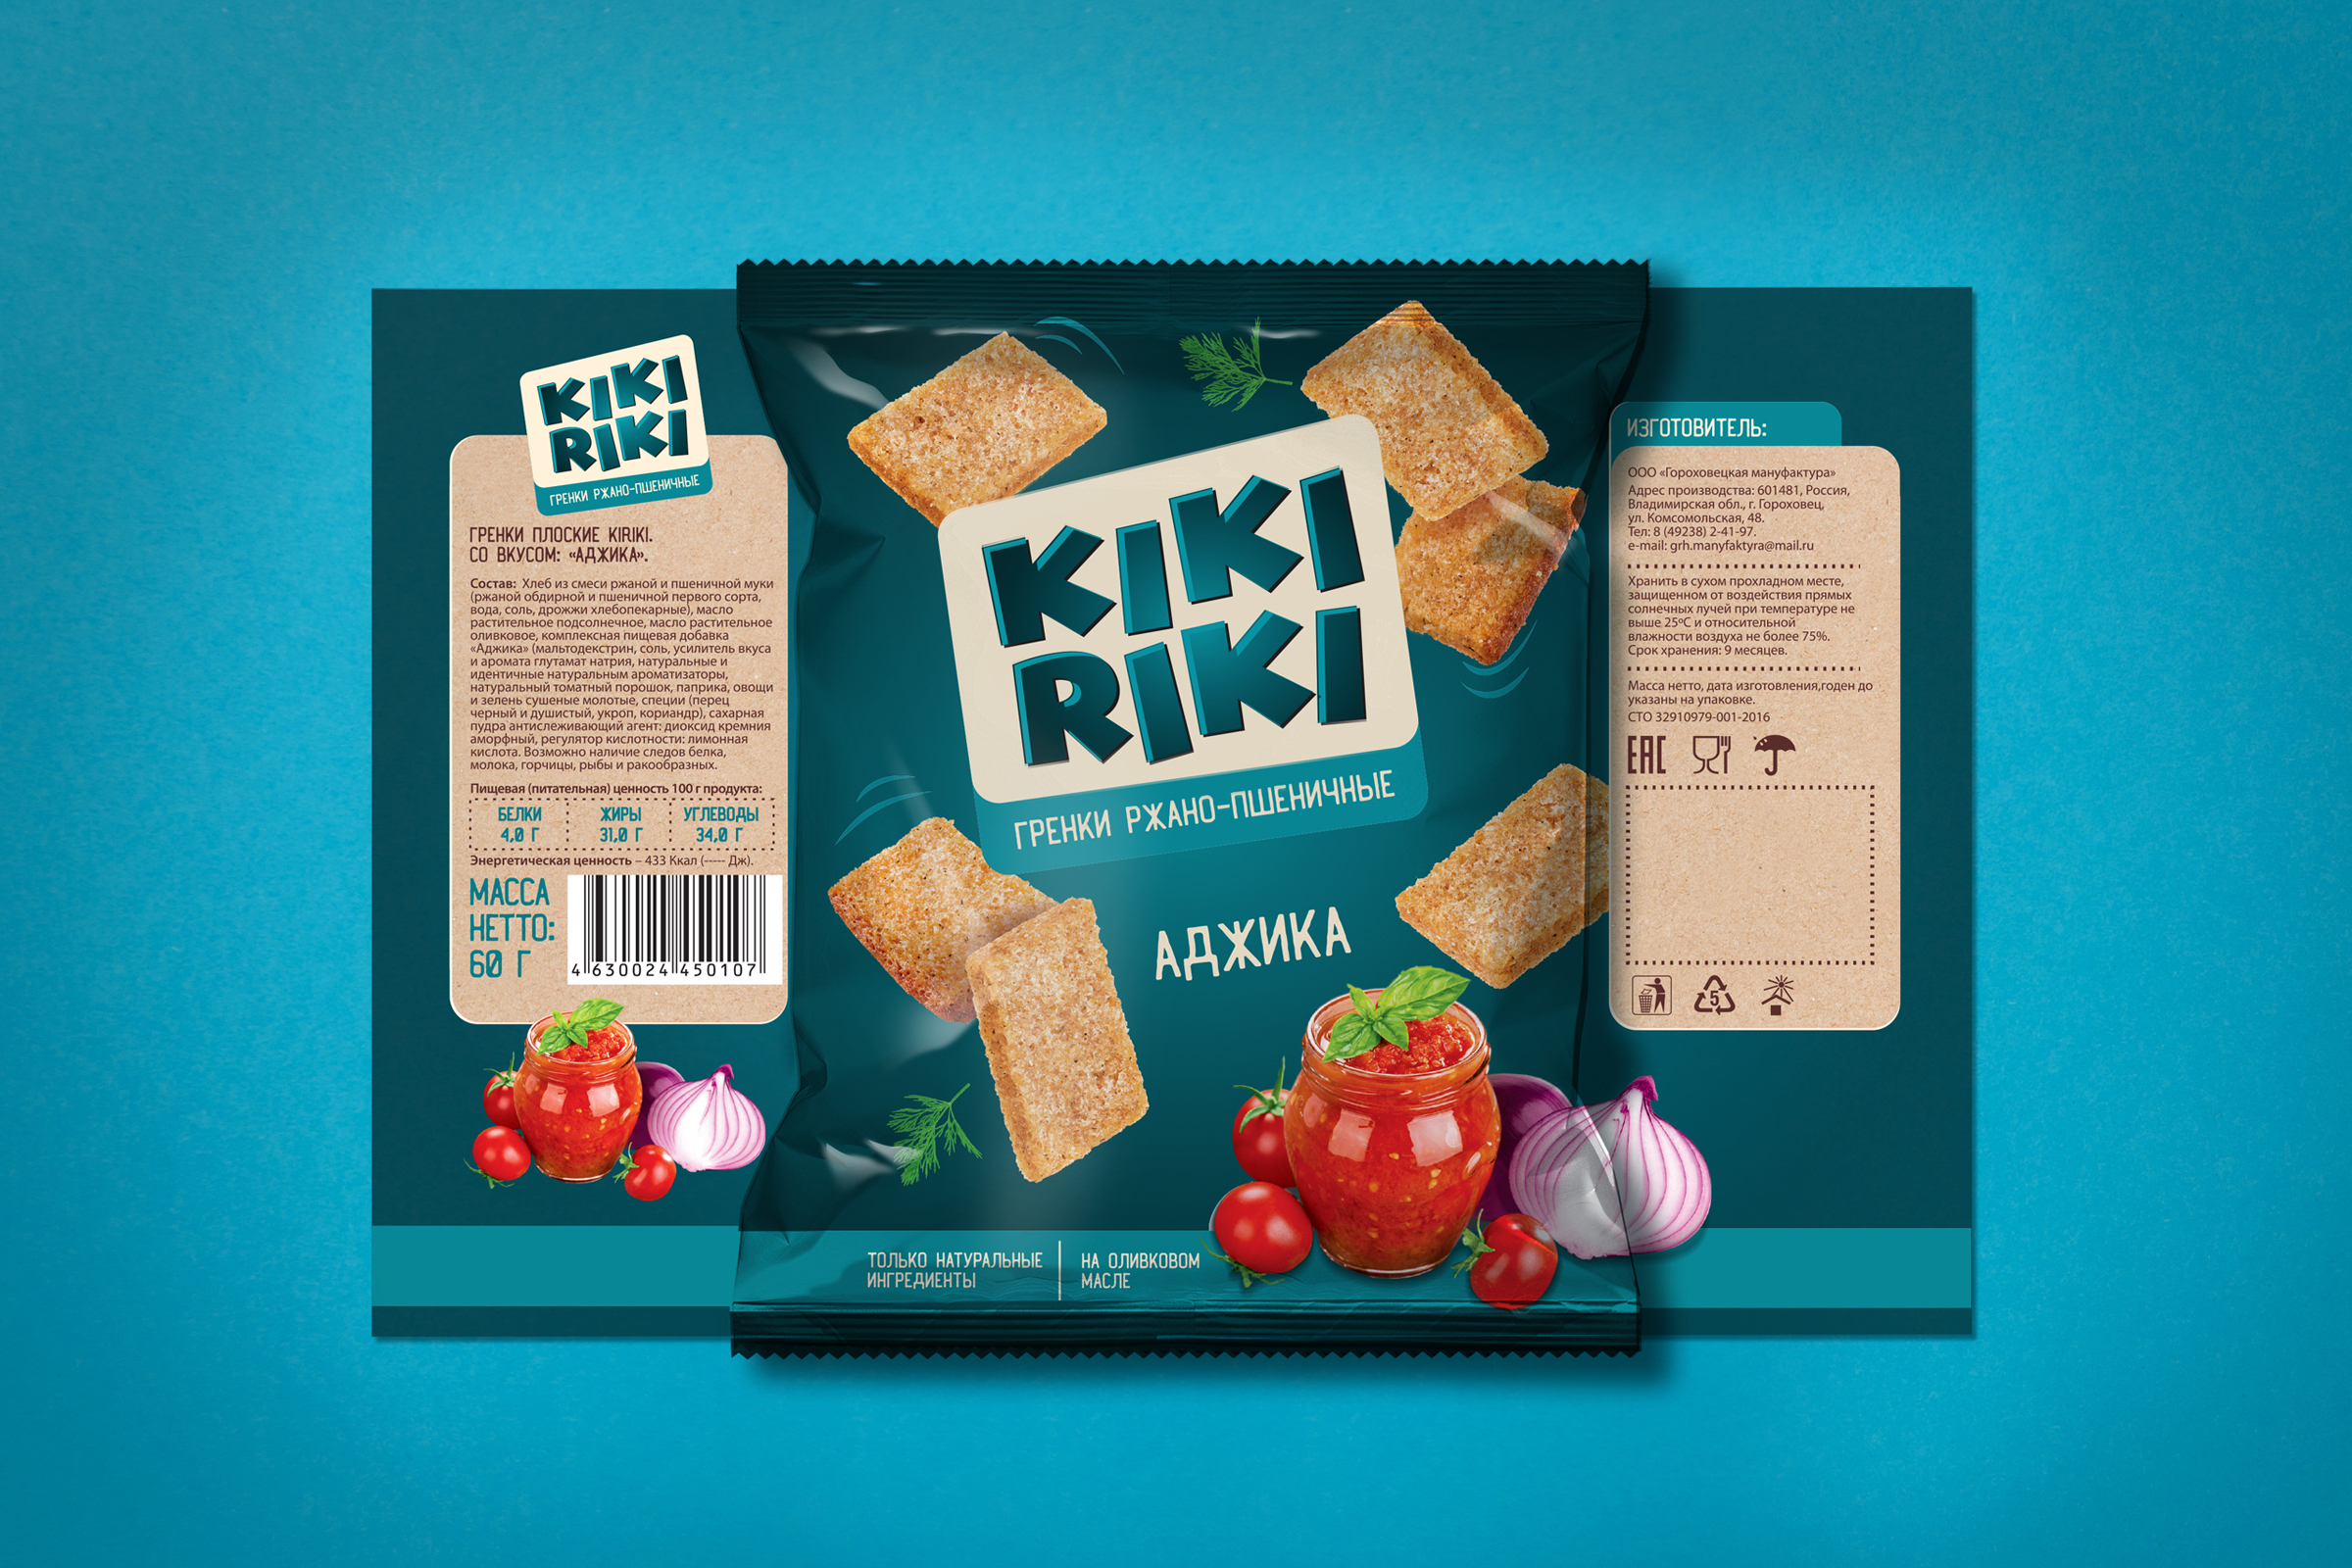 Consumer Graphic Packaging Design with Large Crispy Croutons Products being Centre Stage